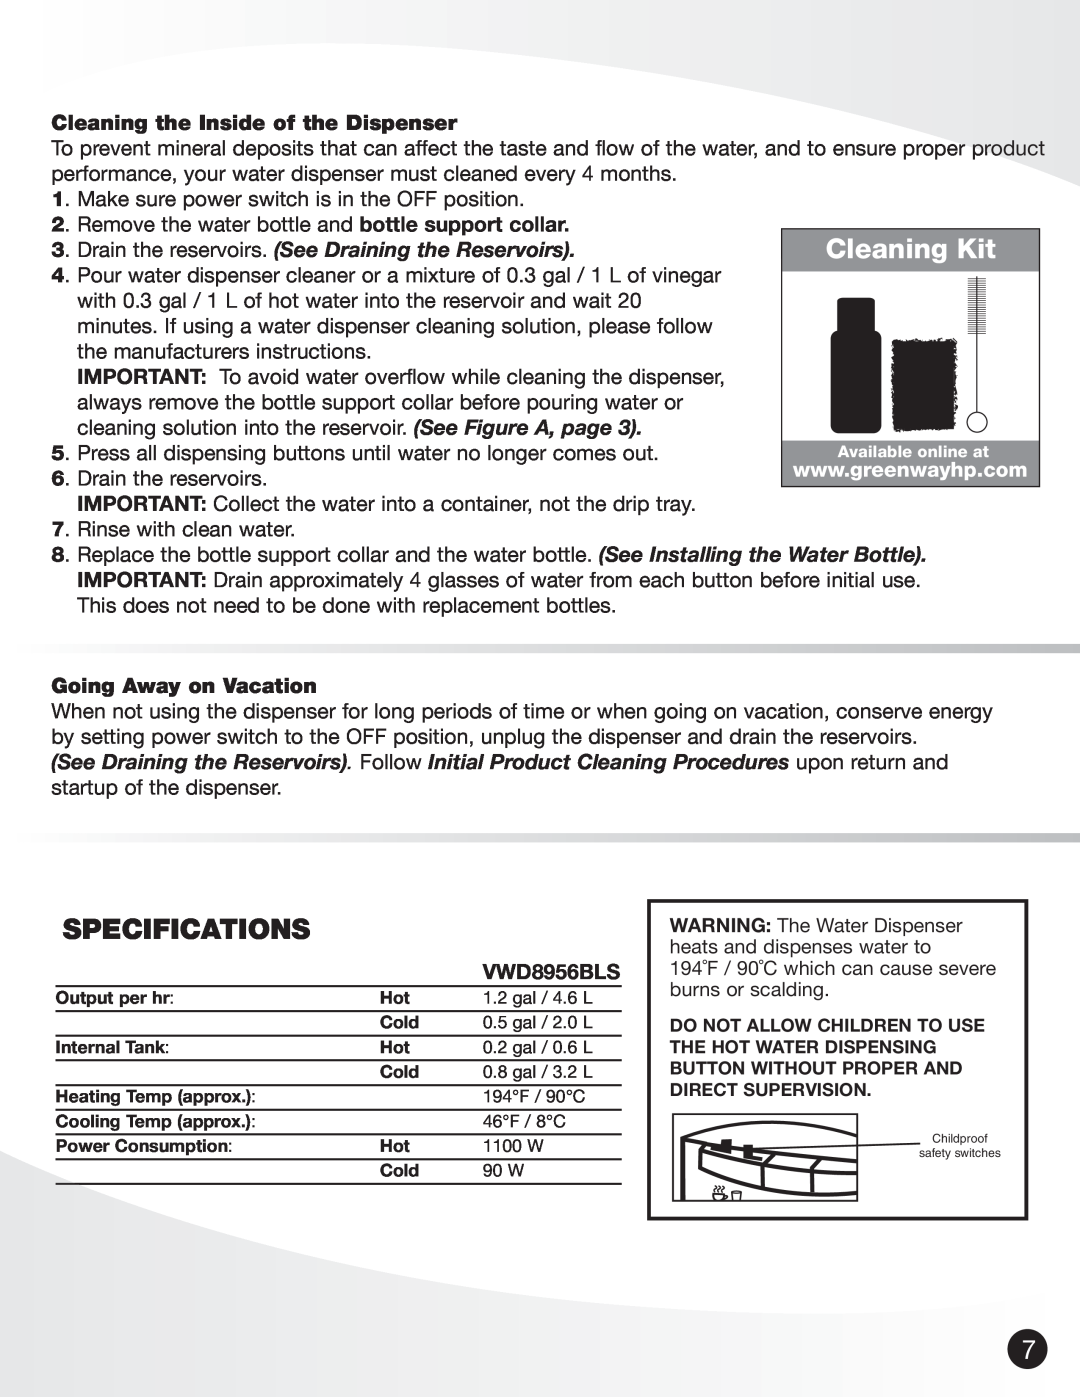 Greenway Home Products VWD8956BLS Specifications, Cleaning the Inside of the Dispenser, Going Away on Vacation 